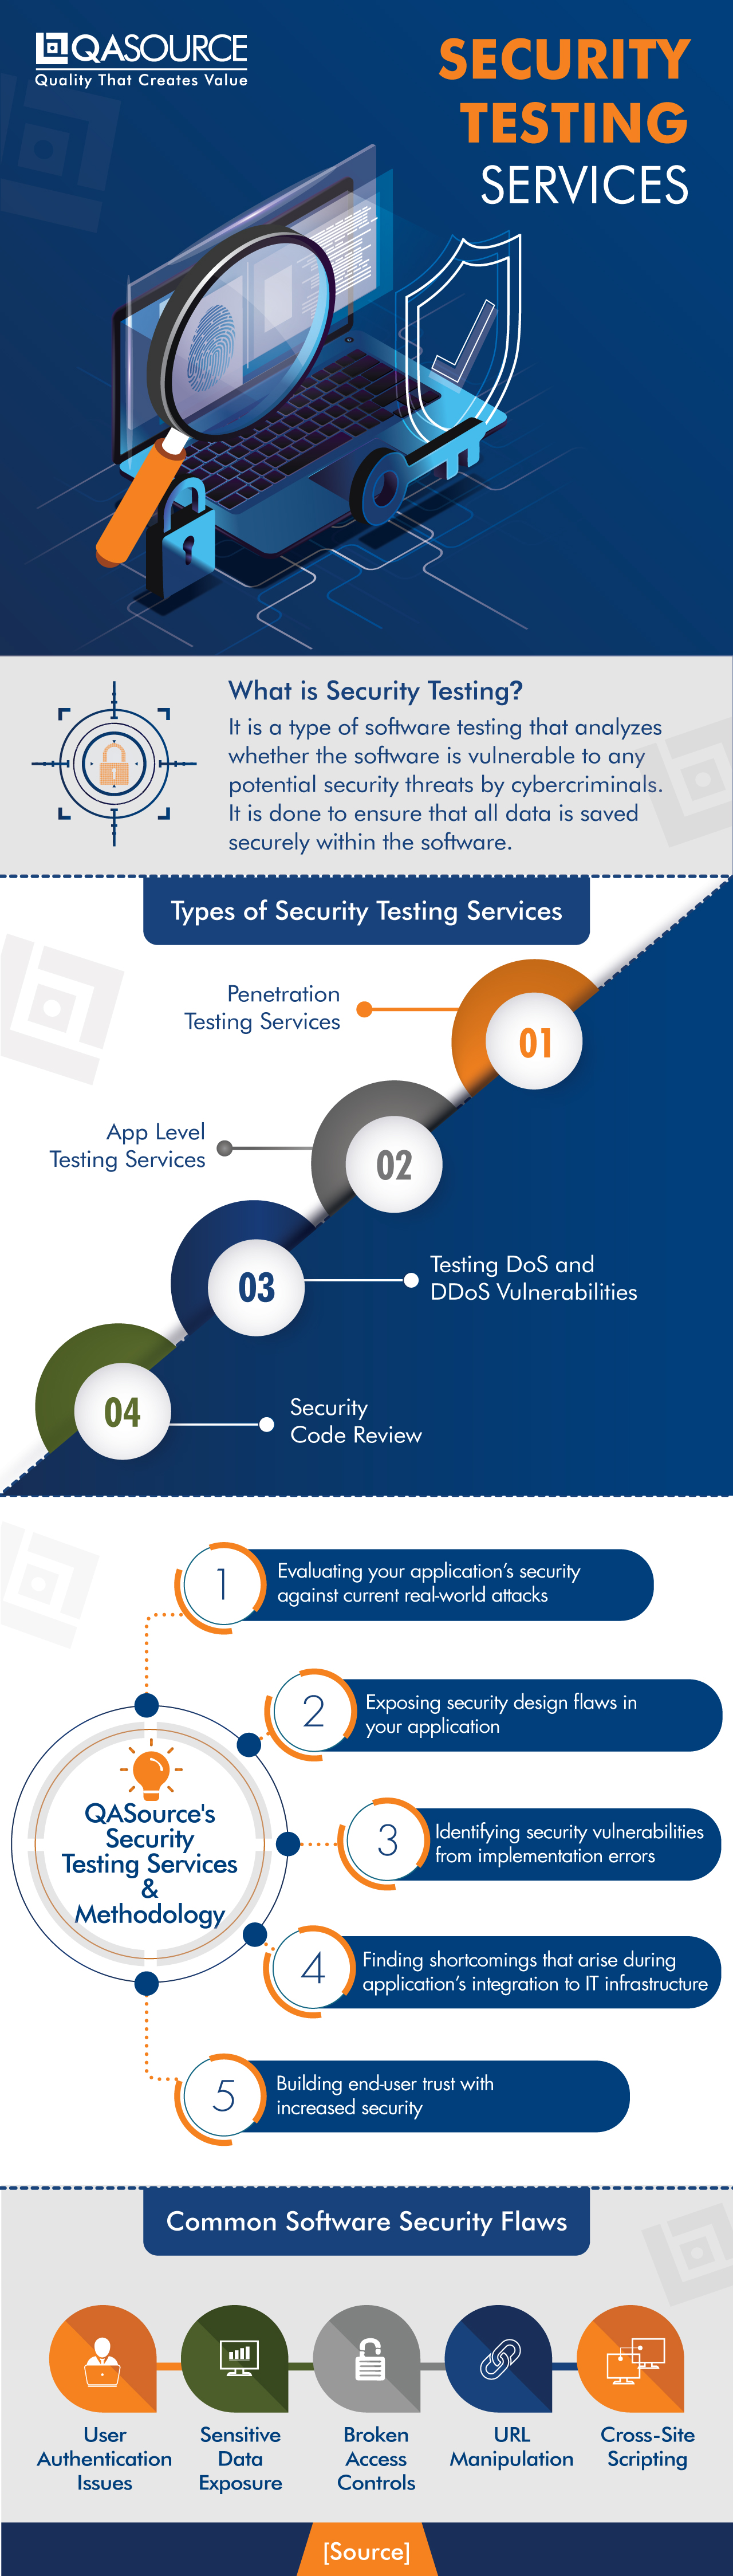 QASource’s Security Testing Services